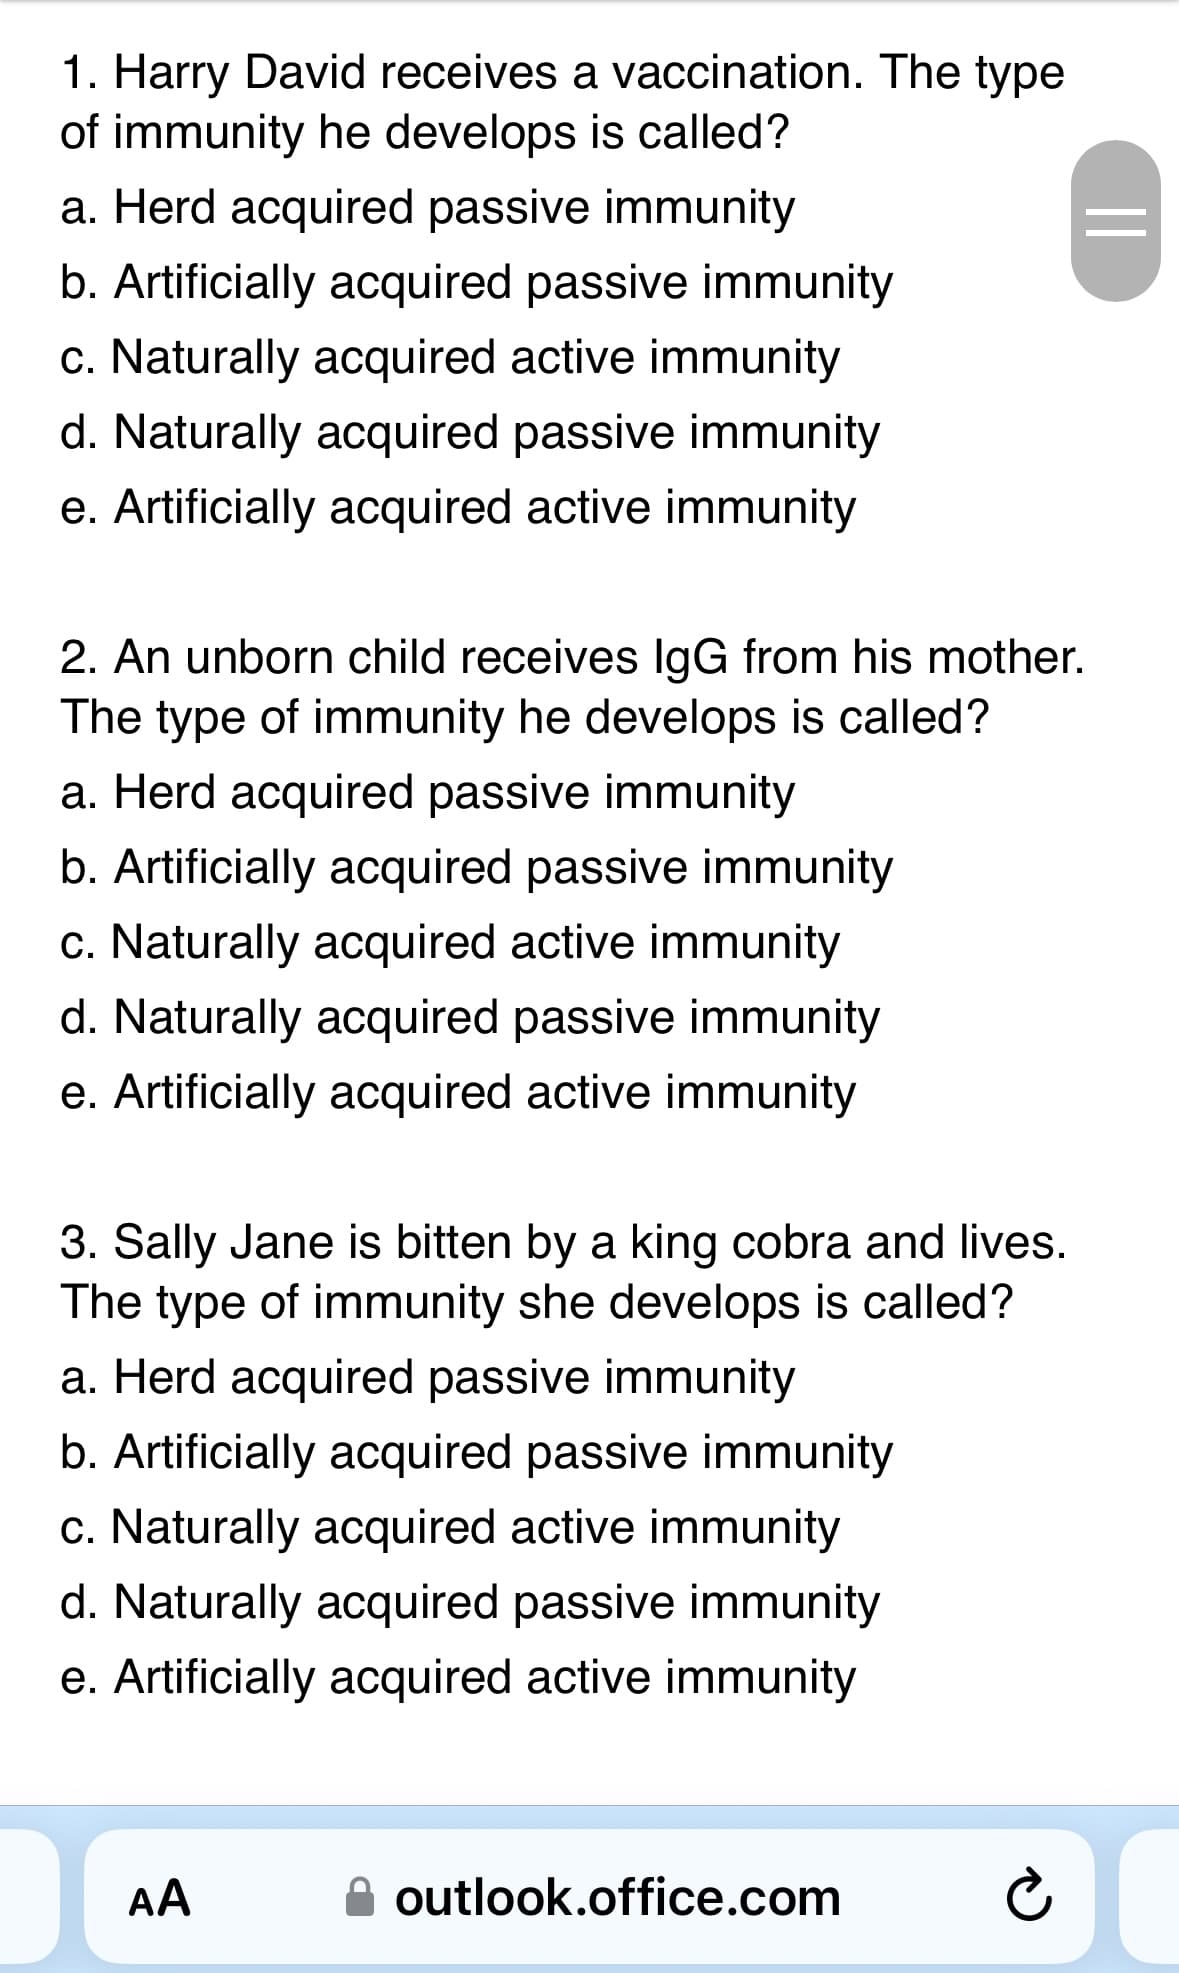 1. Harry David receives a vaccination. The type
of immunity he develops is called?
a. Herd acquired passive immunity
b. Artificially acquired passive immunity
c. Naturally acquired active immunity
d. Naturally acquired passive immunity
e. Artificially acquired active immunity
2. An unborn child receives IgG from his mother.
The type of immunity he develops is called?
a. Herd acquired passive immunity
b. Artificially acquired passive immunity
c. Naturally acquired active immunity
d. Naturally acquired passive immunity
e. Artificially acquired active immunity
3. Sally Jane is bitten by a king cobra and lives.
The type of immunity she develops is called?
a. Herd acquired passive immunity
b. Artificially acquired passive immunity
c. Naturally acquired active immunity
d. Naturally acquired passive immunity
e. Artificially acquired active immunity
D
AA
outlook.office.com
||
Ć
D